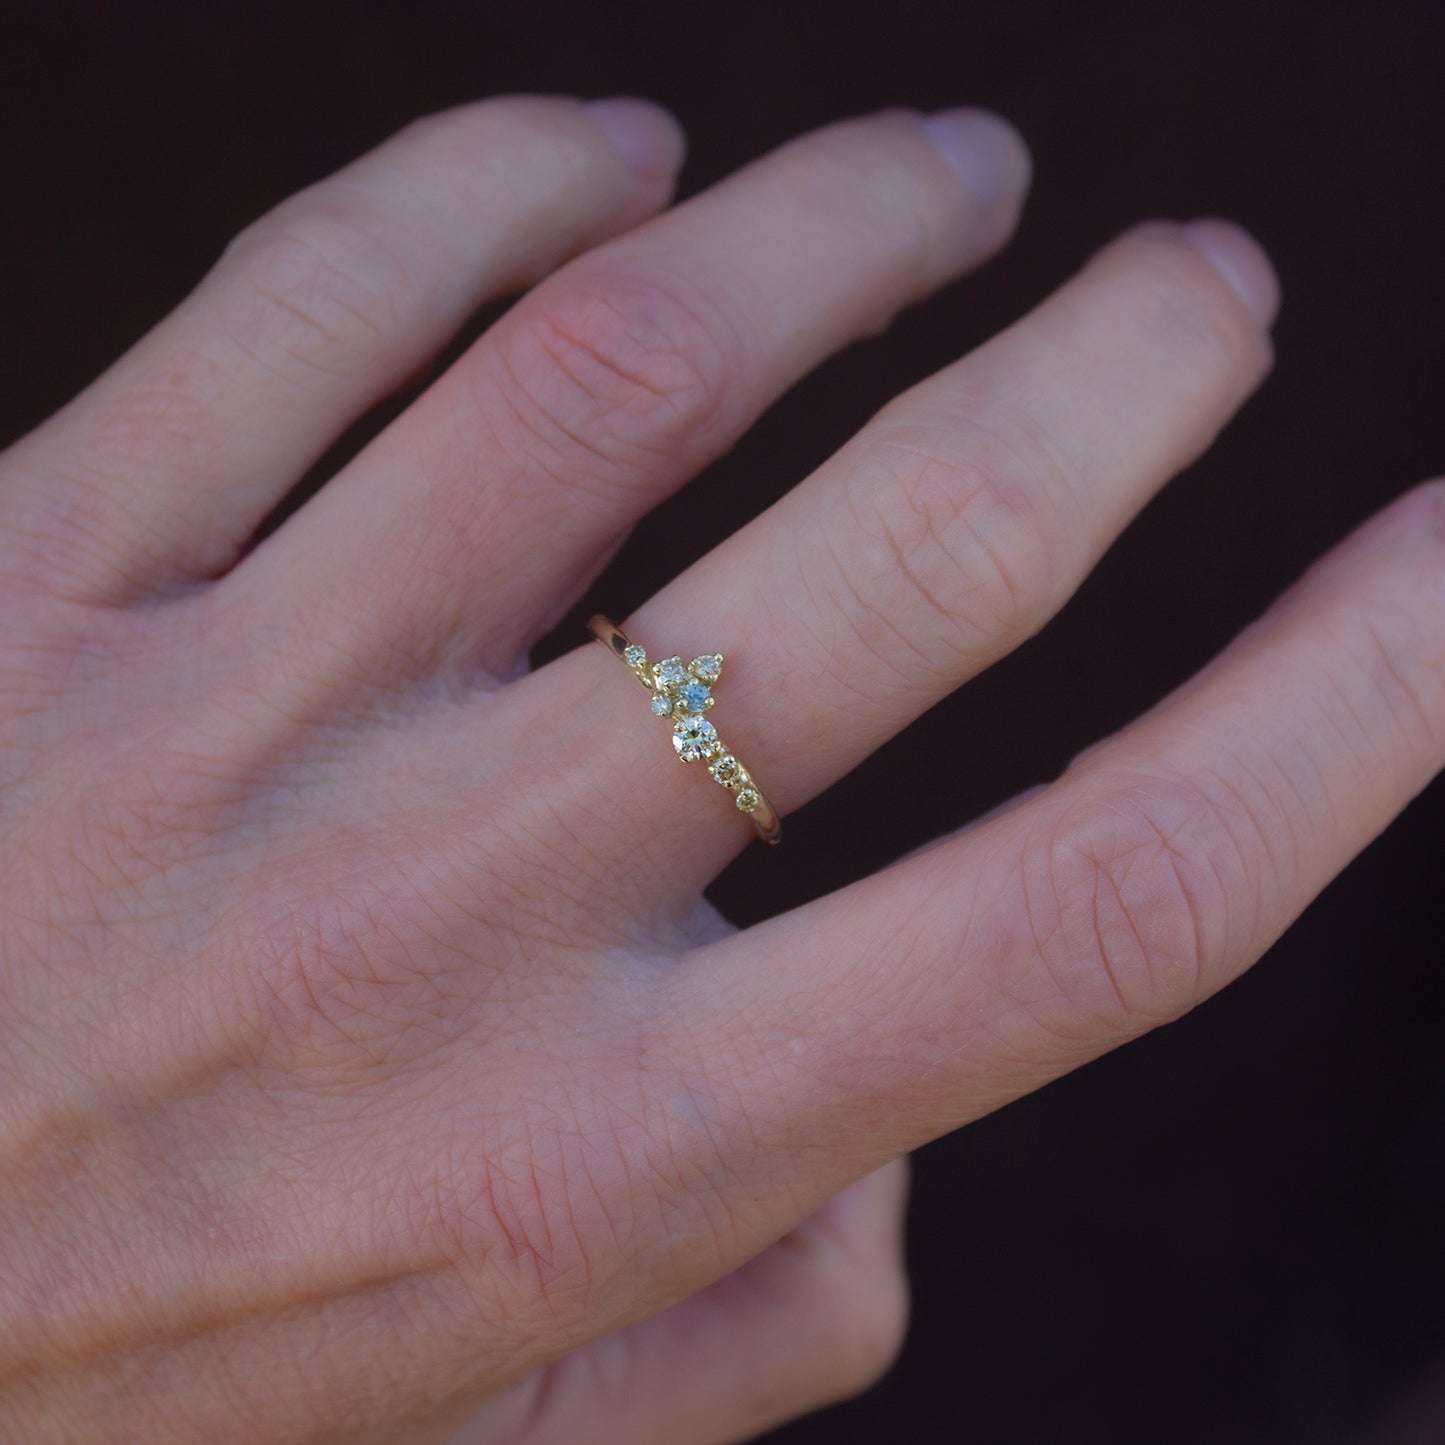 Beautiful, delicate ring featuring organically scattered array of natural yellow diamonds topped with a green sapphire.